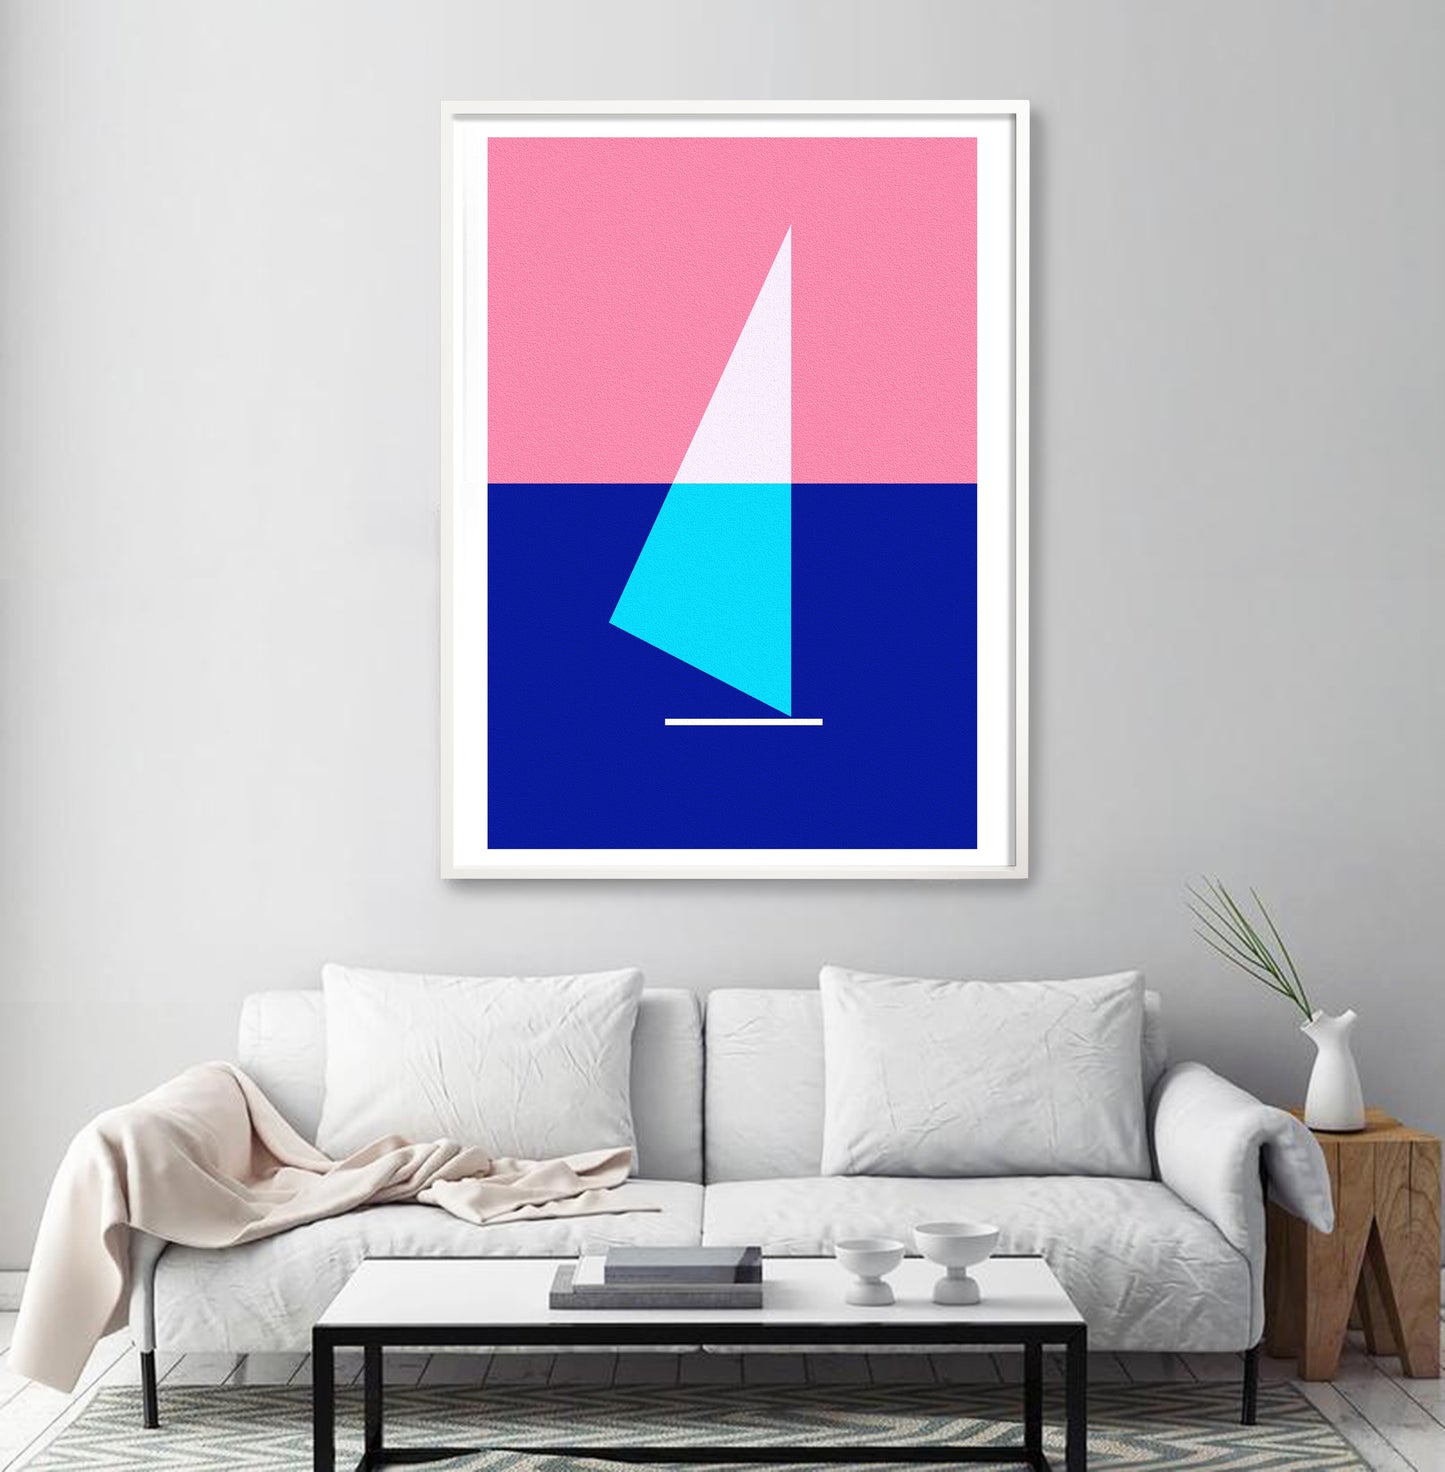 Sailing By Limited Edition Screen Print.